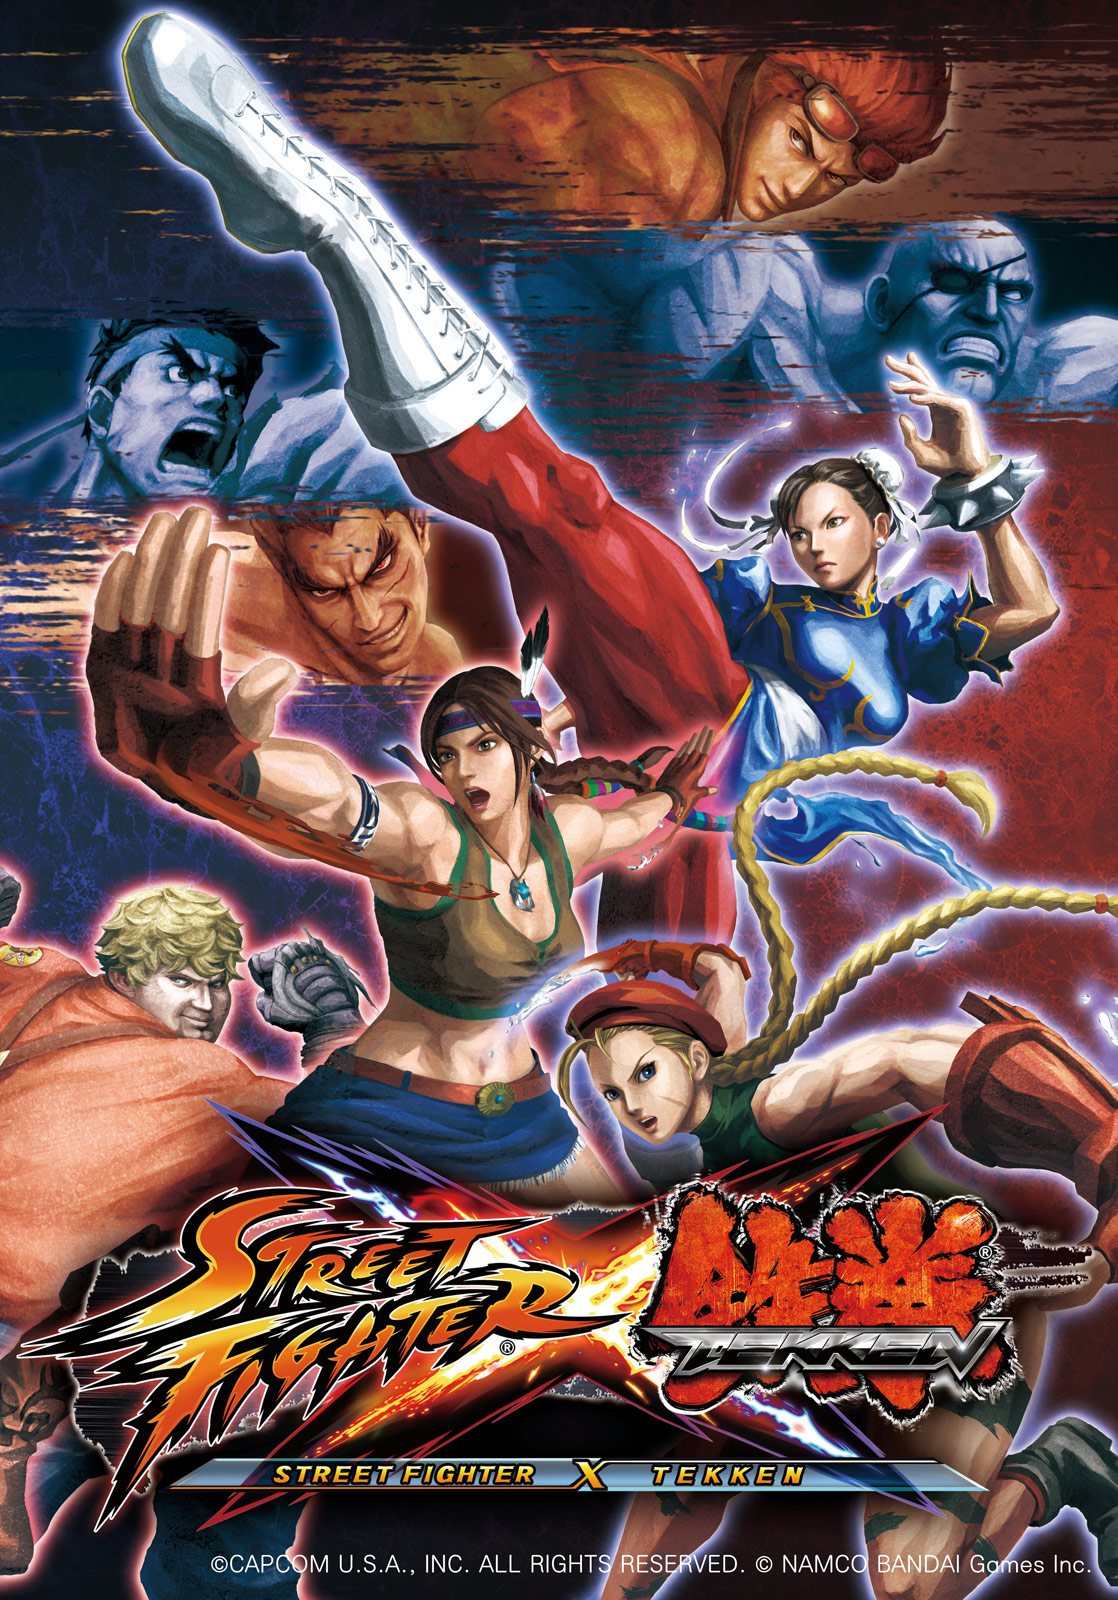 [SFXT] Défi 5on5 – WatchDaMatch X eLive au Get Rich Or Die Fighting, le 17 Mars 2012